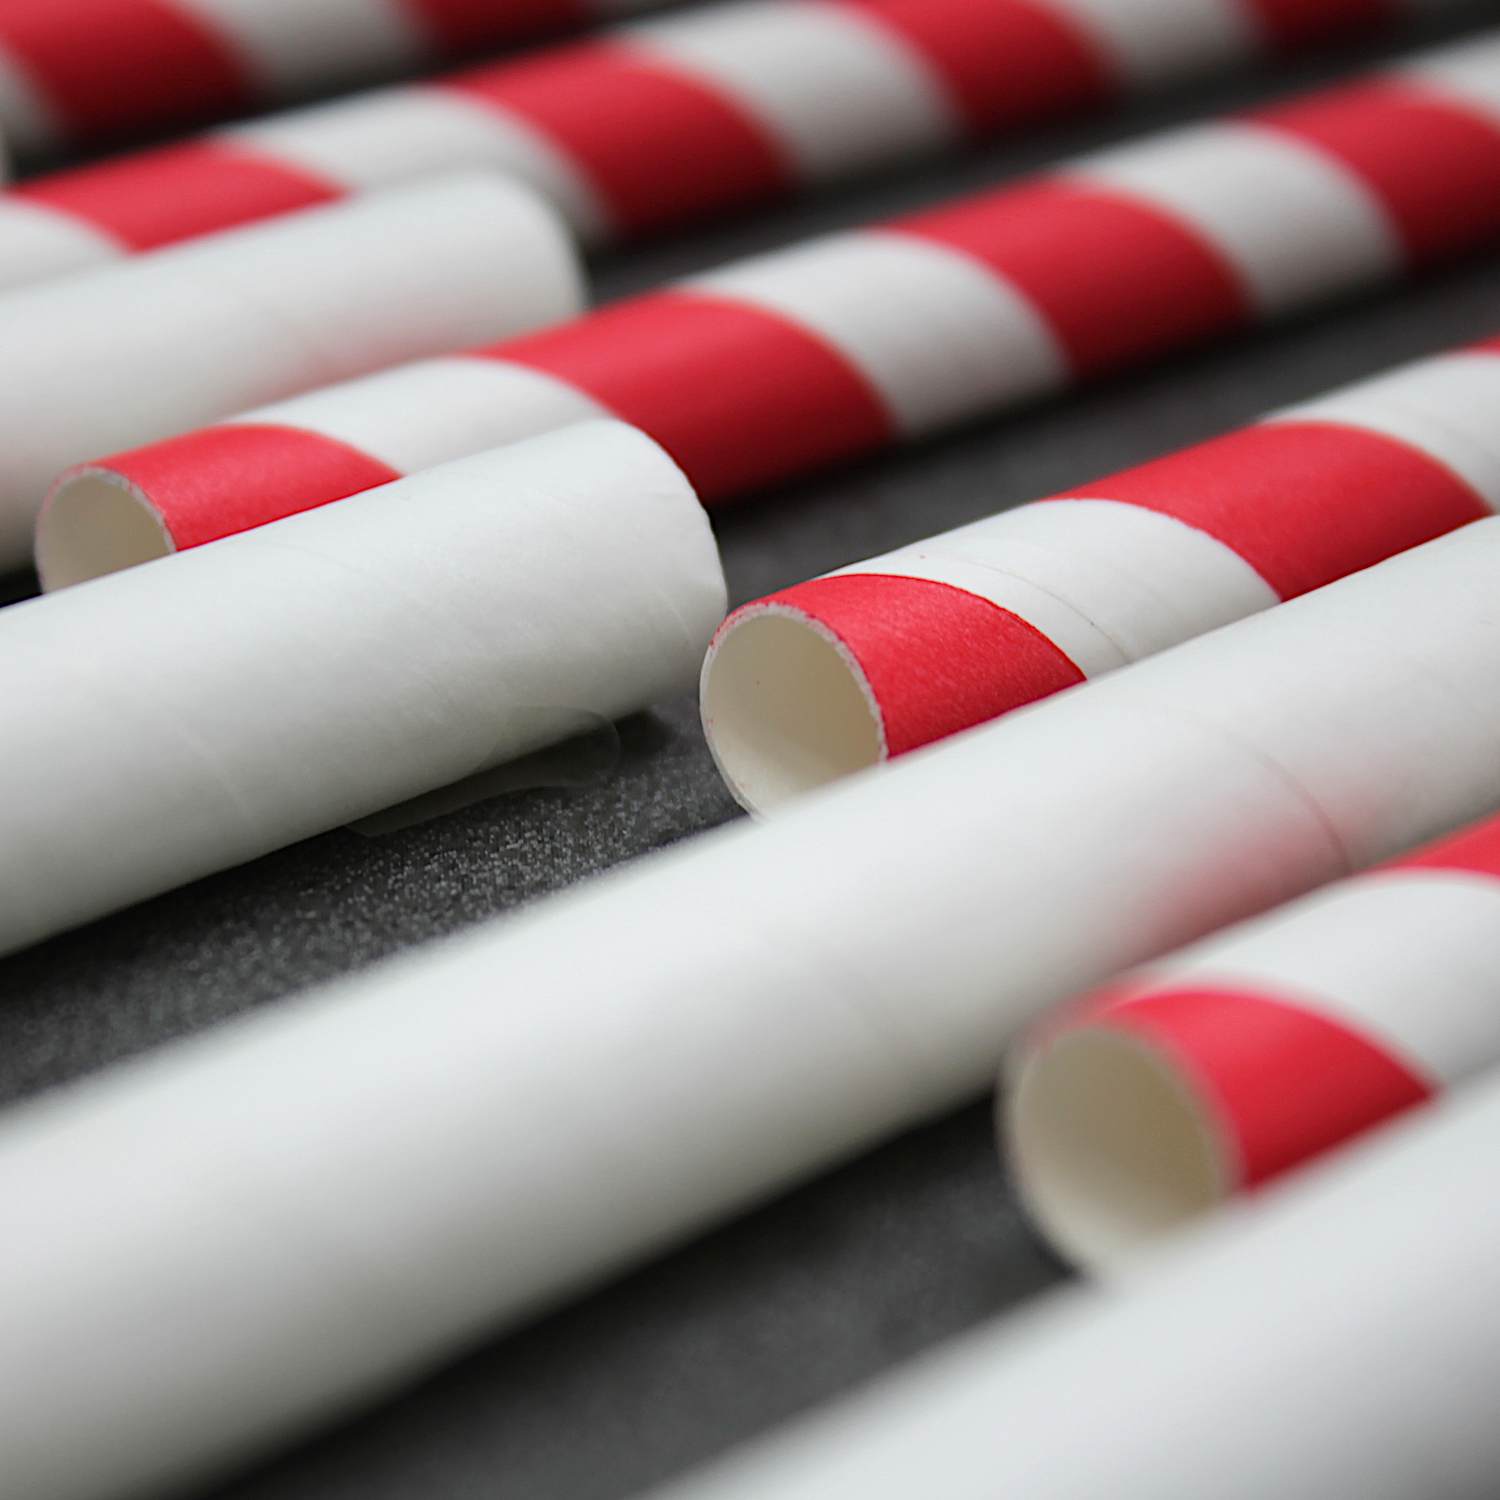 Our Red and White Striped Paper Straws vs Our White Solid Paper Straws.